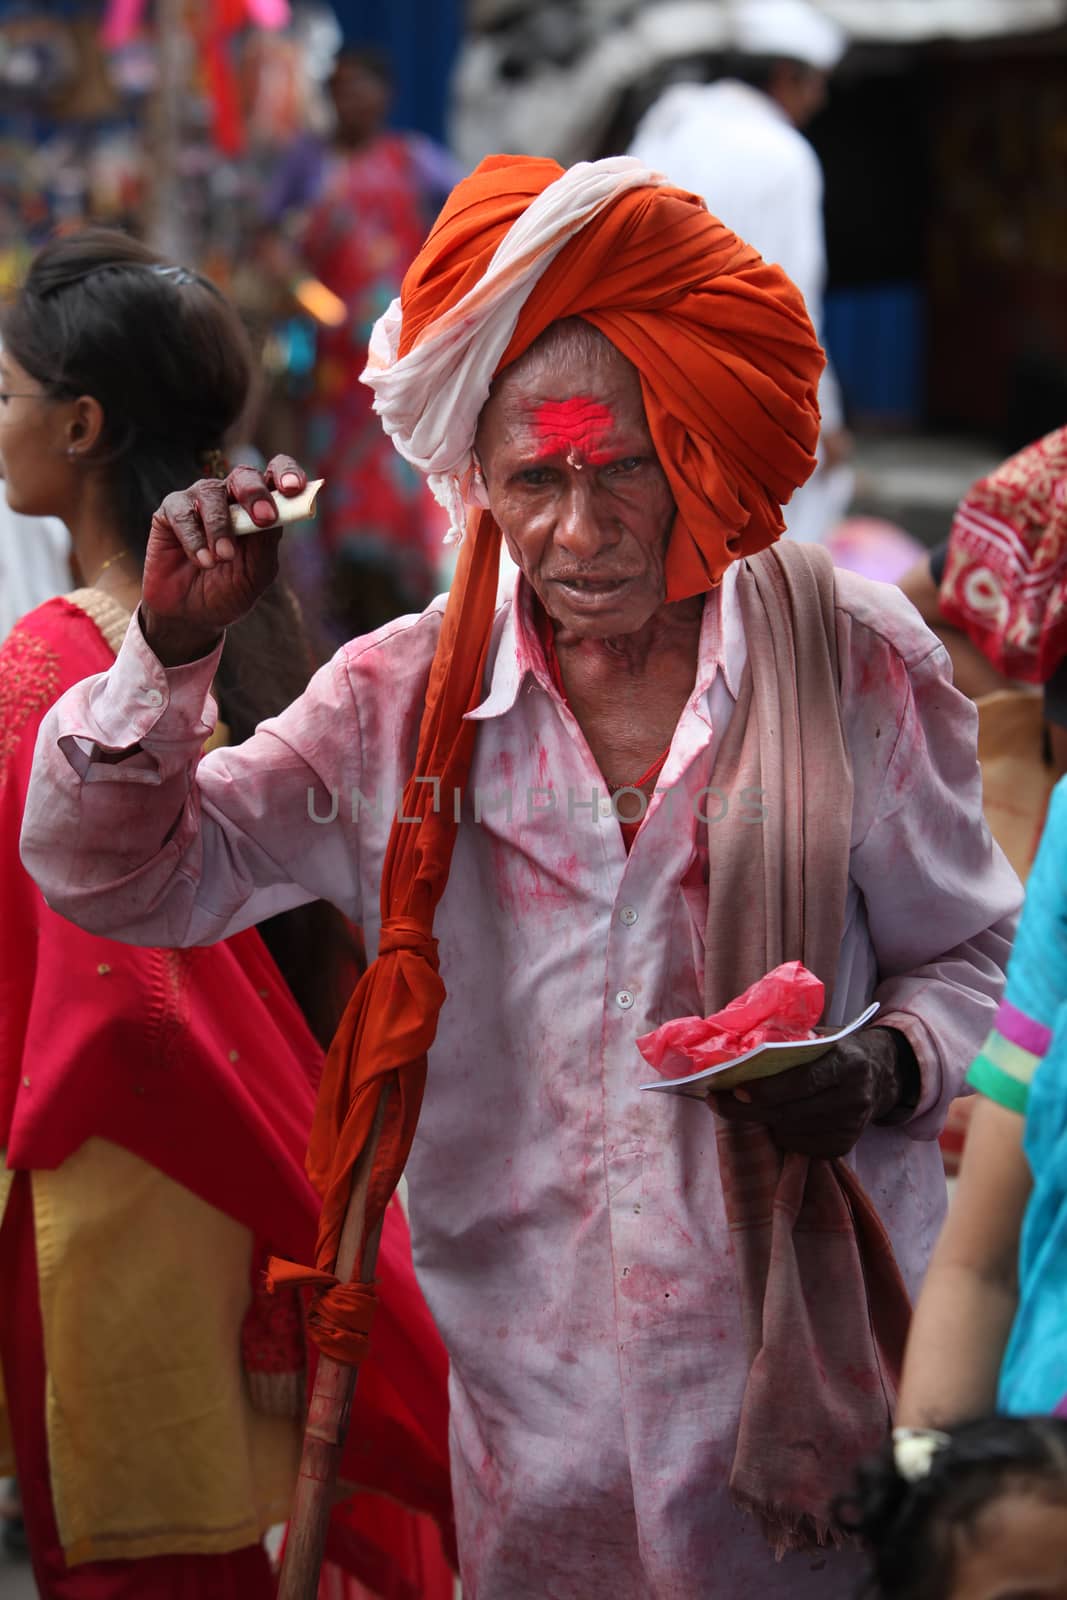 Pune, India  - ‎July 11, ‎2015: An old Indian pilgrim in a traditional attire during a religious wari pilgrimmage festival in India